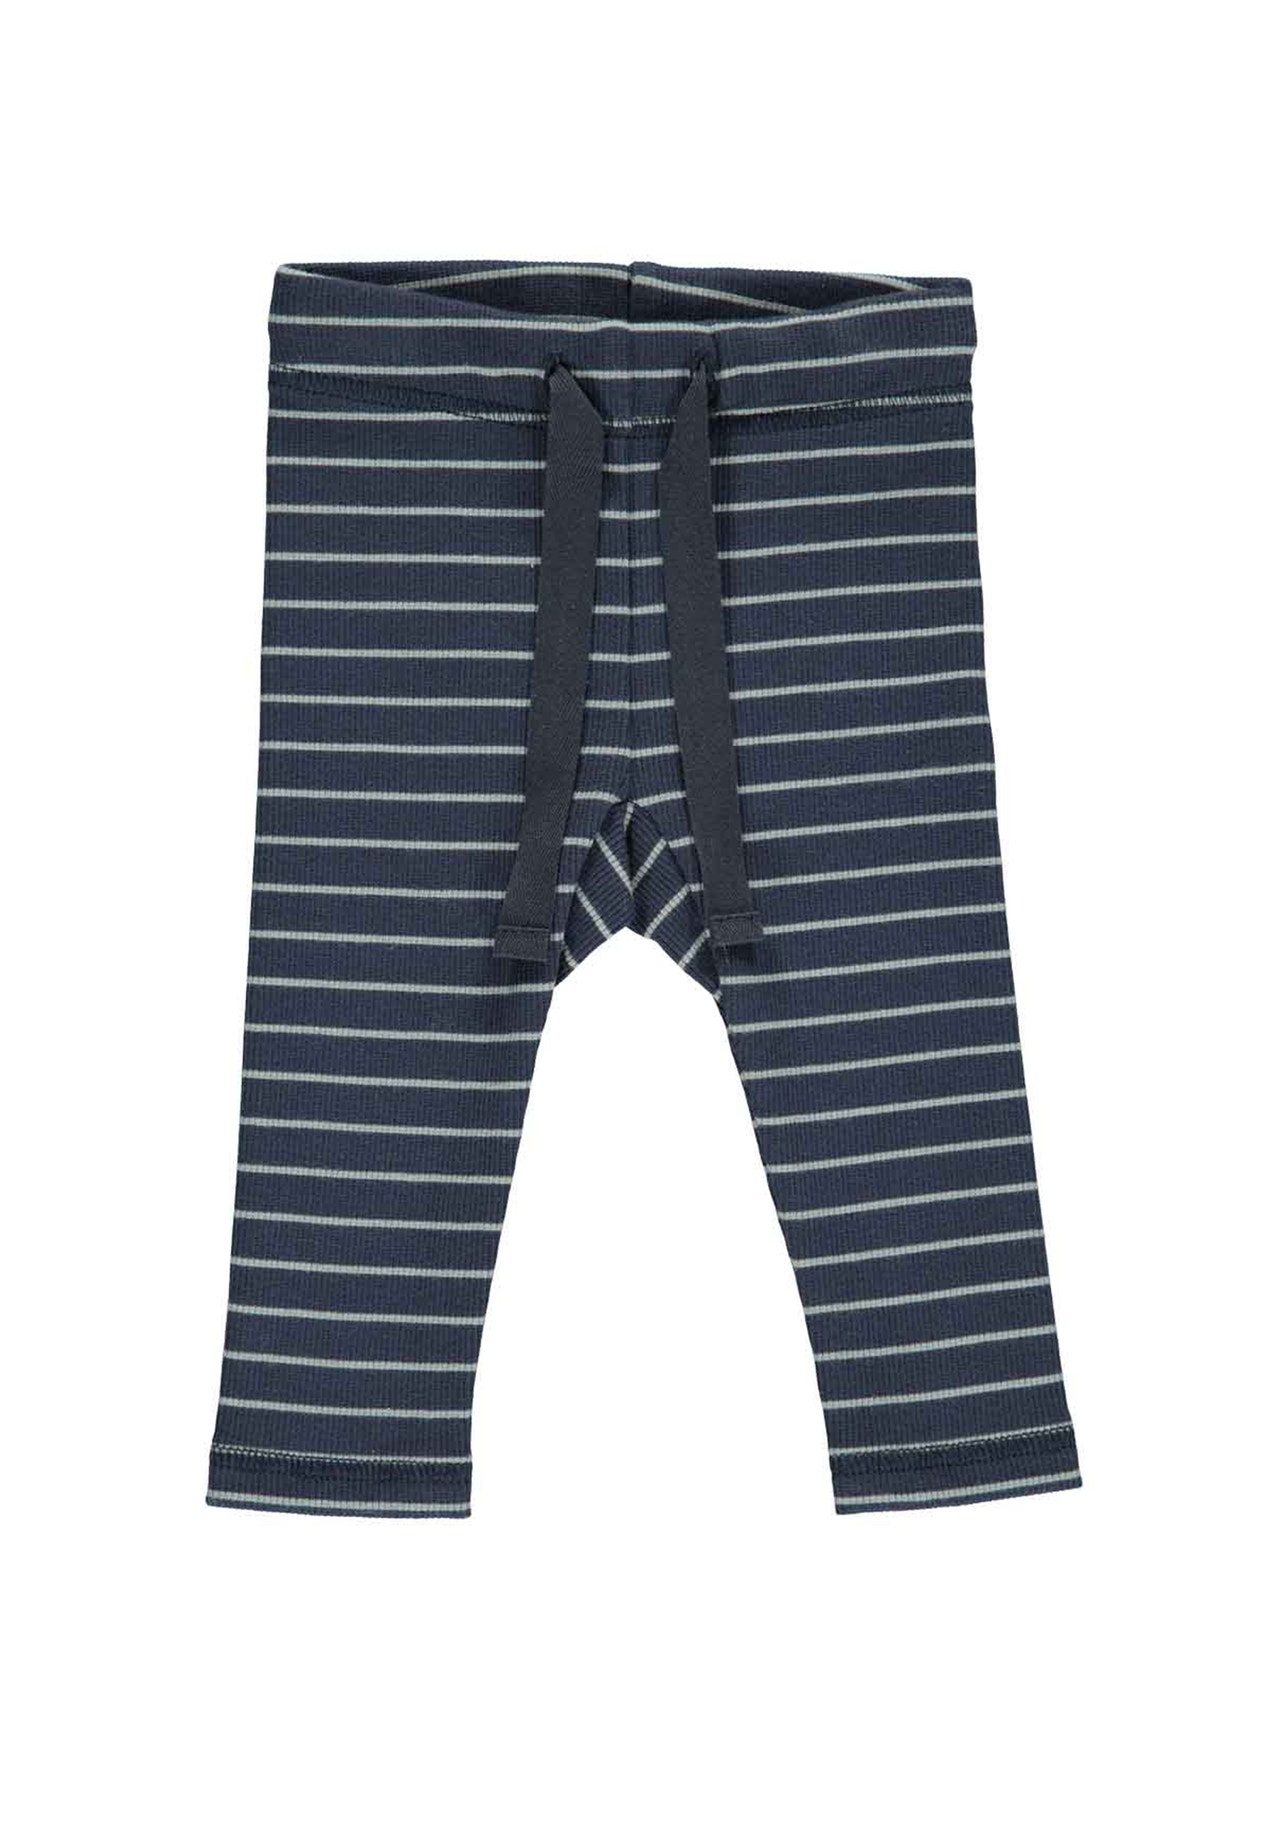 MAMA.LICIOUS Baby-trousers -Night Blue/ Spa Green - 1535096800